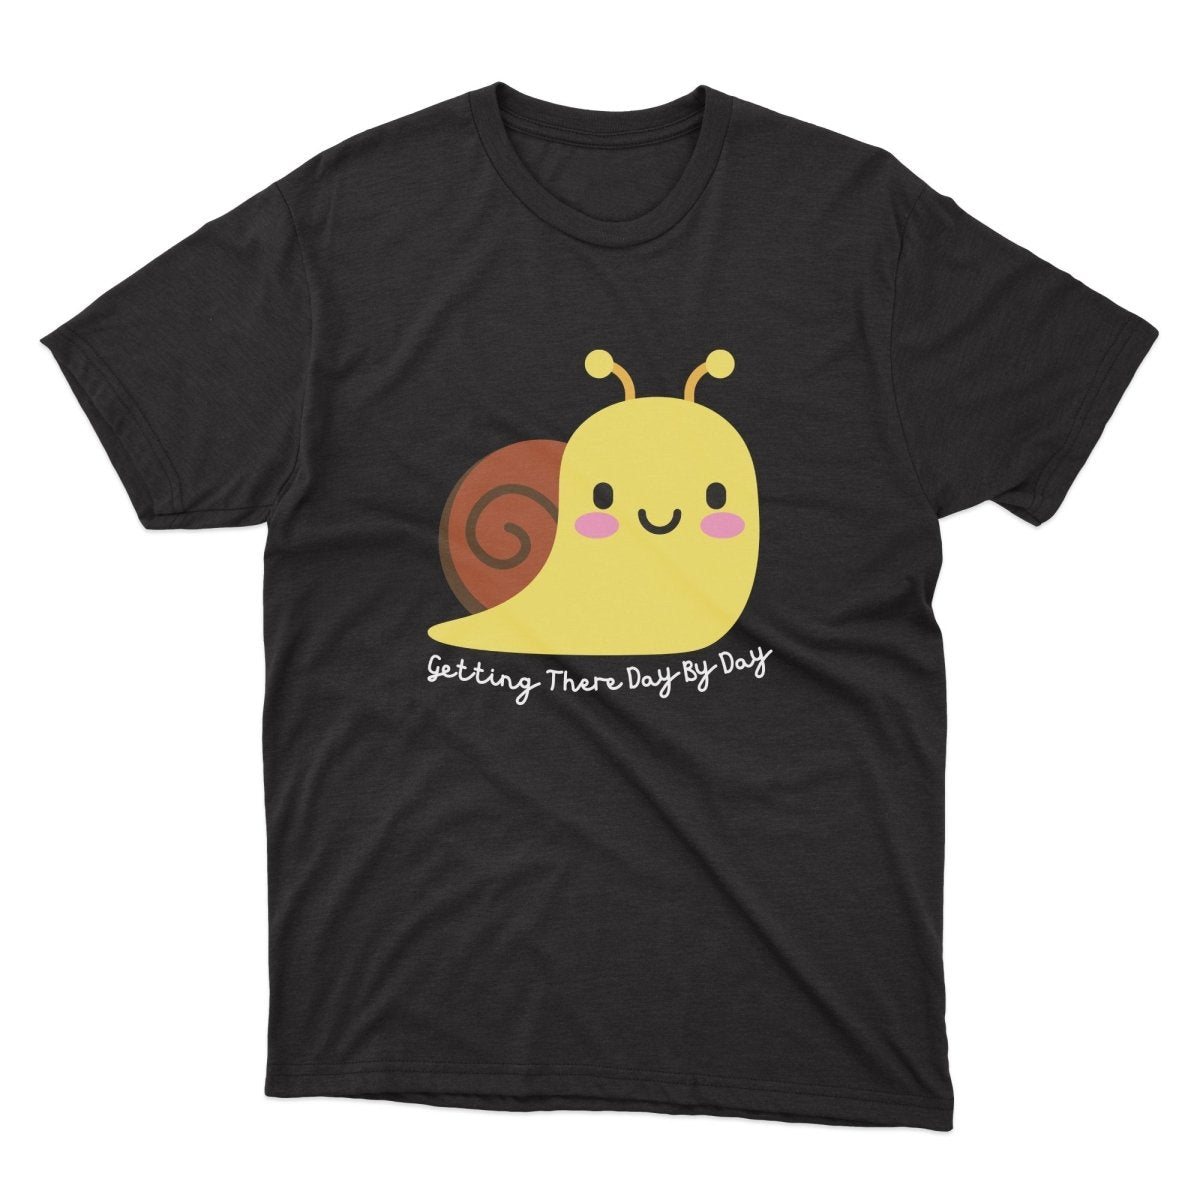 Getting There Day By Day Snail Shirt - stickerbullGetting There Day By Day Snail ShirtShirtsPrintifystickerbull17842983938073928726WhiteMa black t - shirt with a yellow snail on it